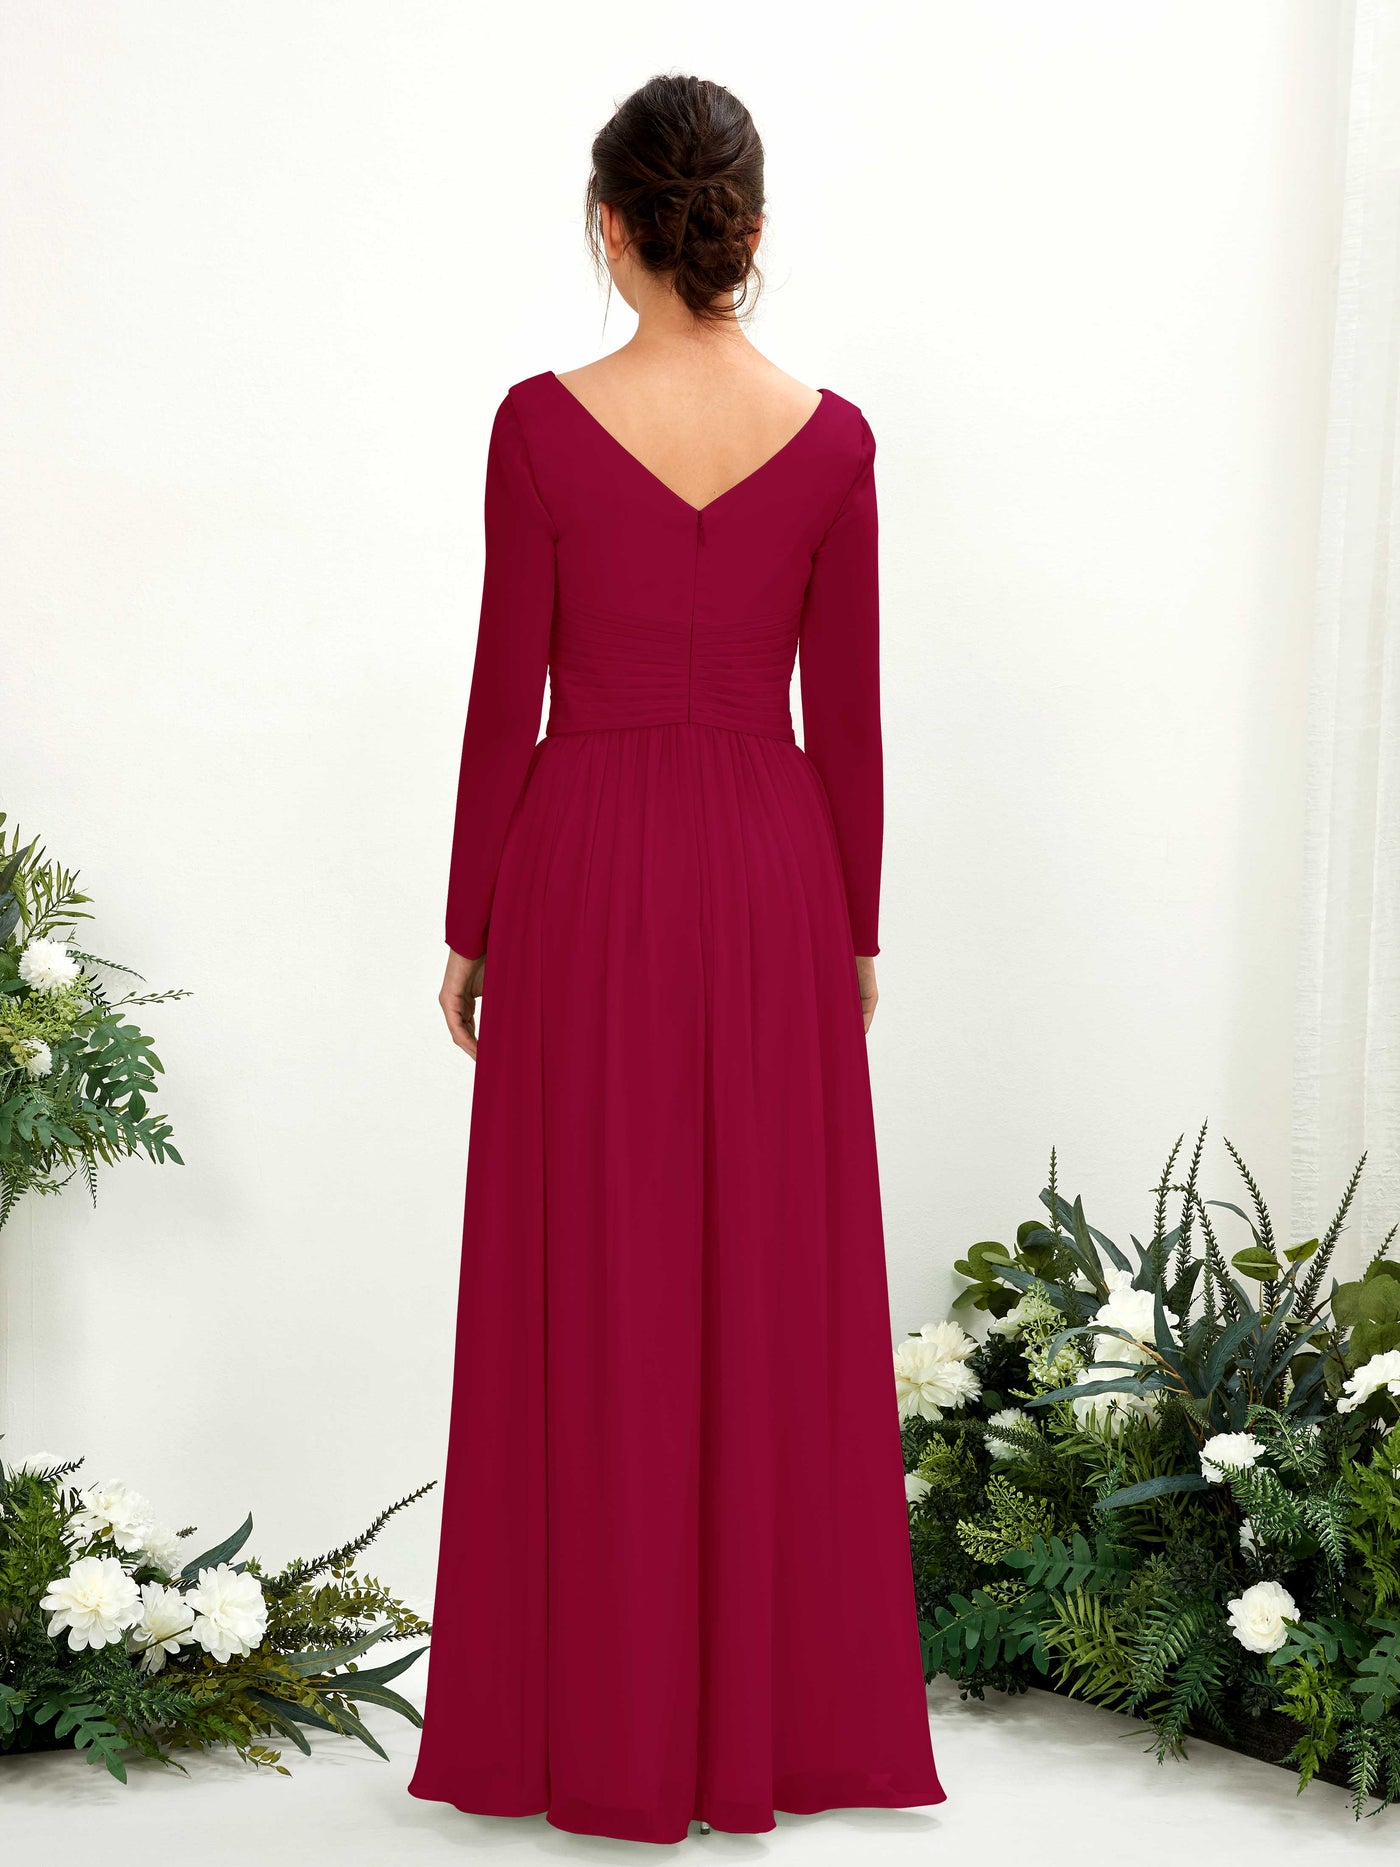 Jester Red Bridesmaid Dresses Bridesmaid Dress A-line Chiffon V-neck Full Length Long Sleeves Wedding Party Dress (81220341)#color_jester-red